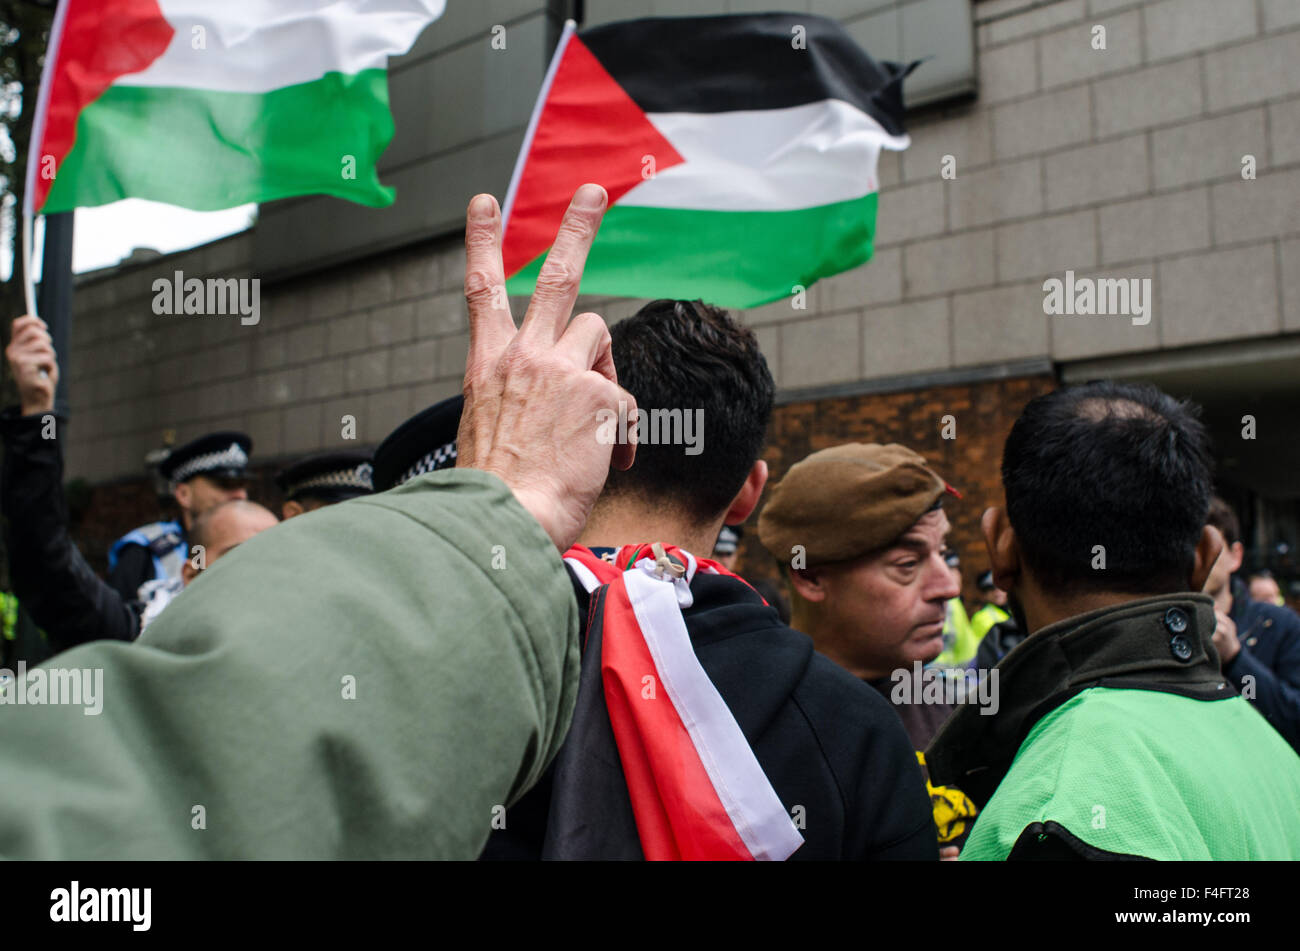 London, UK. 17th October, 2015. A single Israeli protester interrupts the 'Free Palestine' protest, by brandishing an Israeli flag. Credit:  Bertie Oakes/Alamy Live News Stock Photo